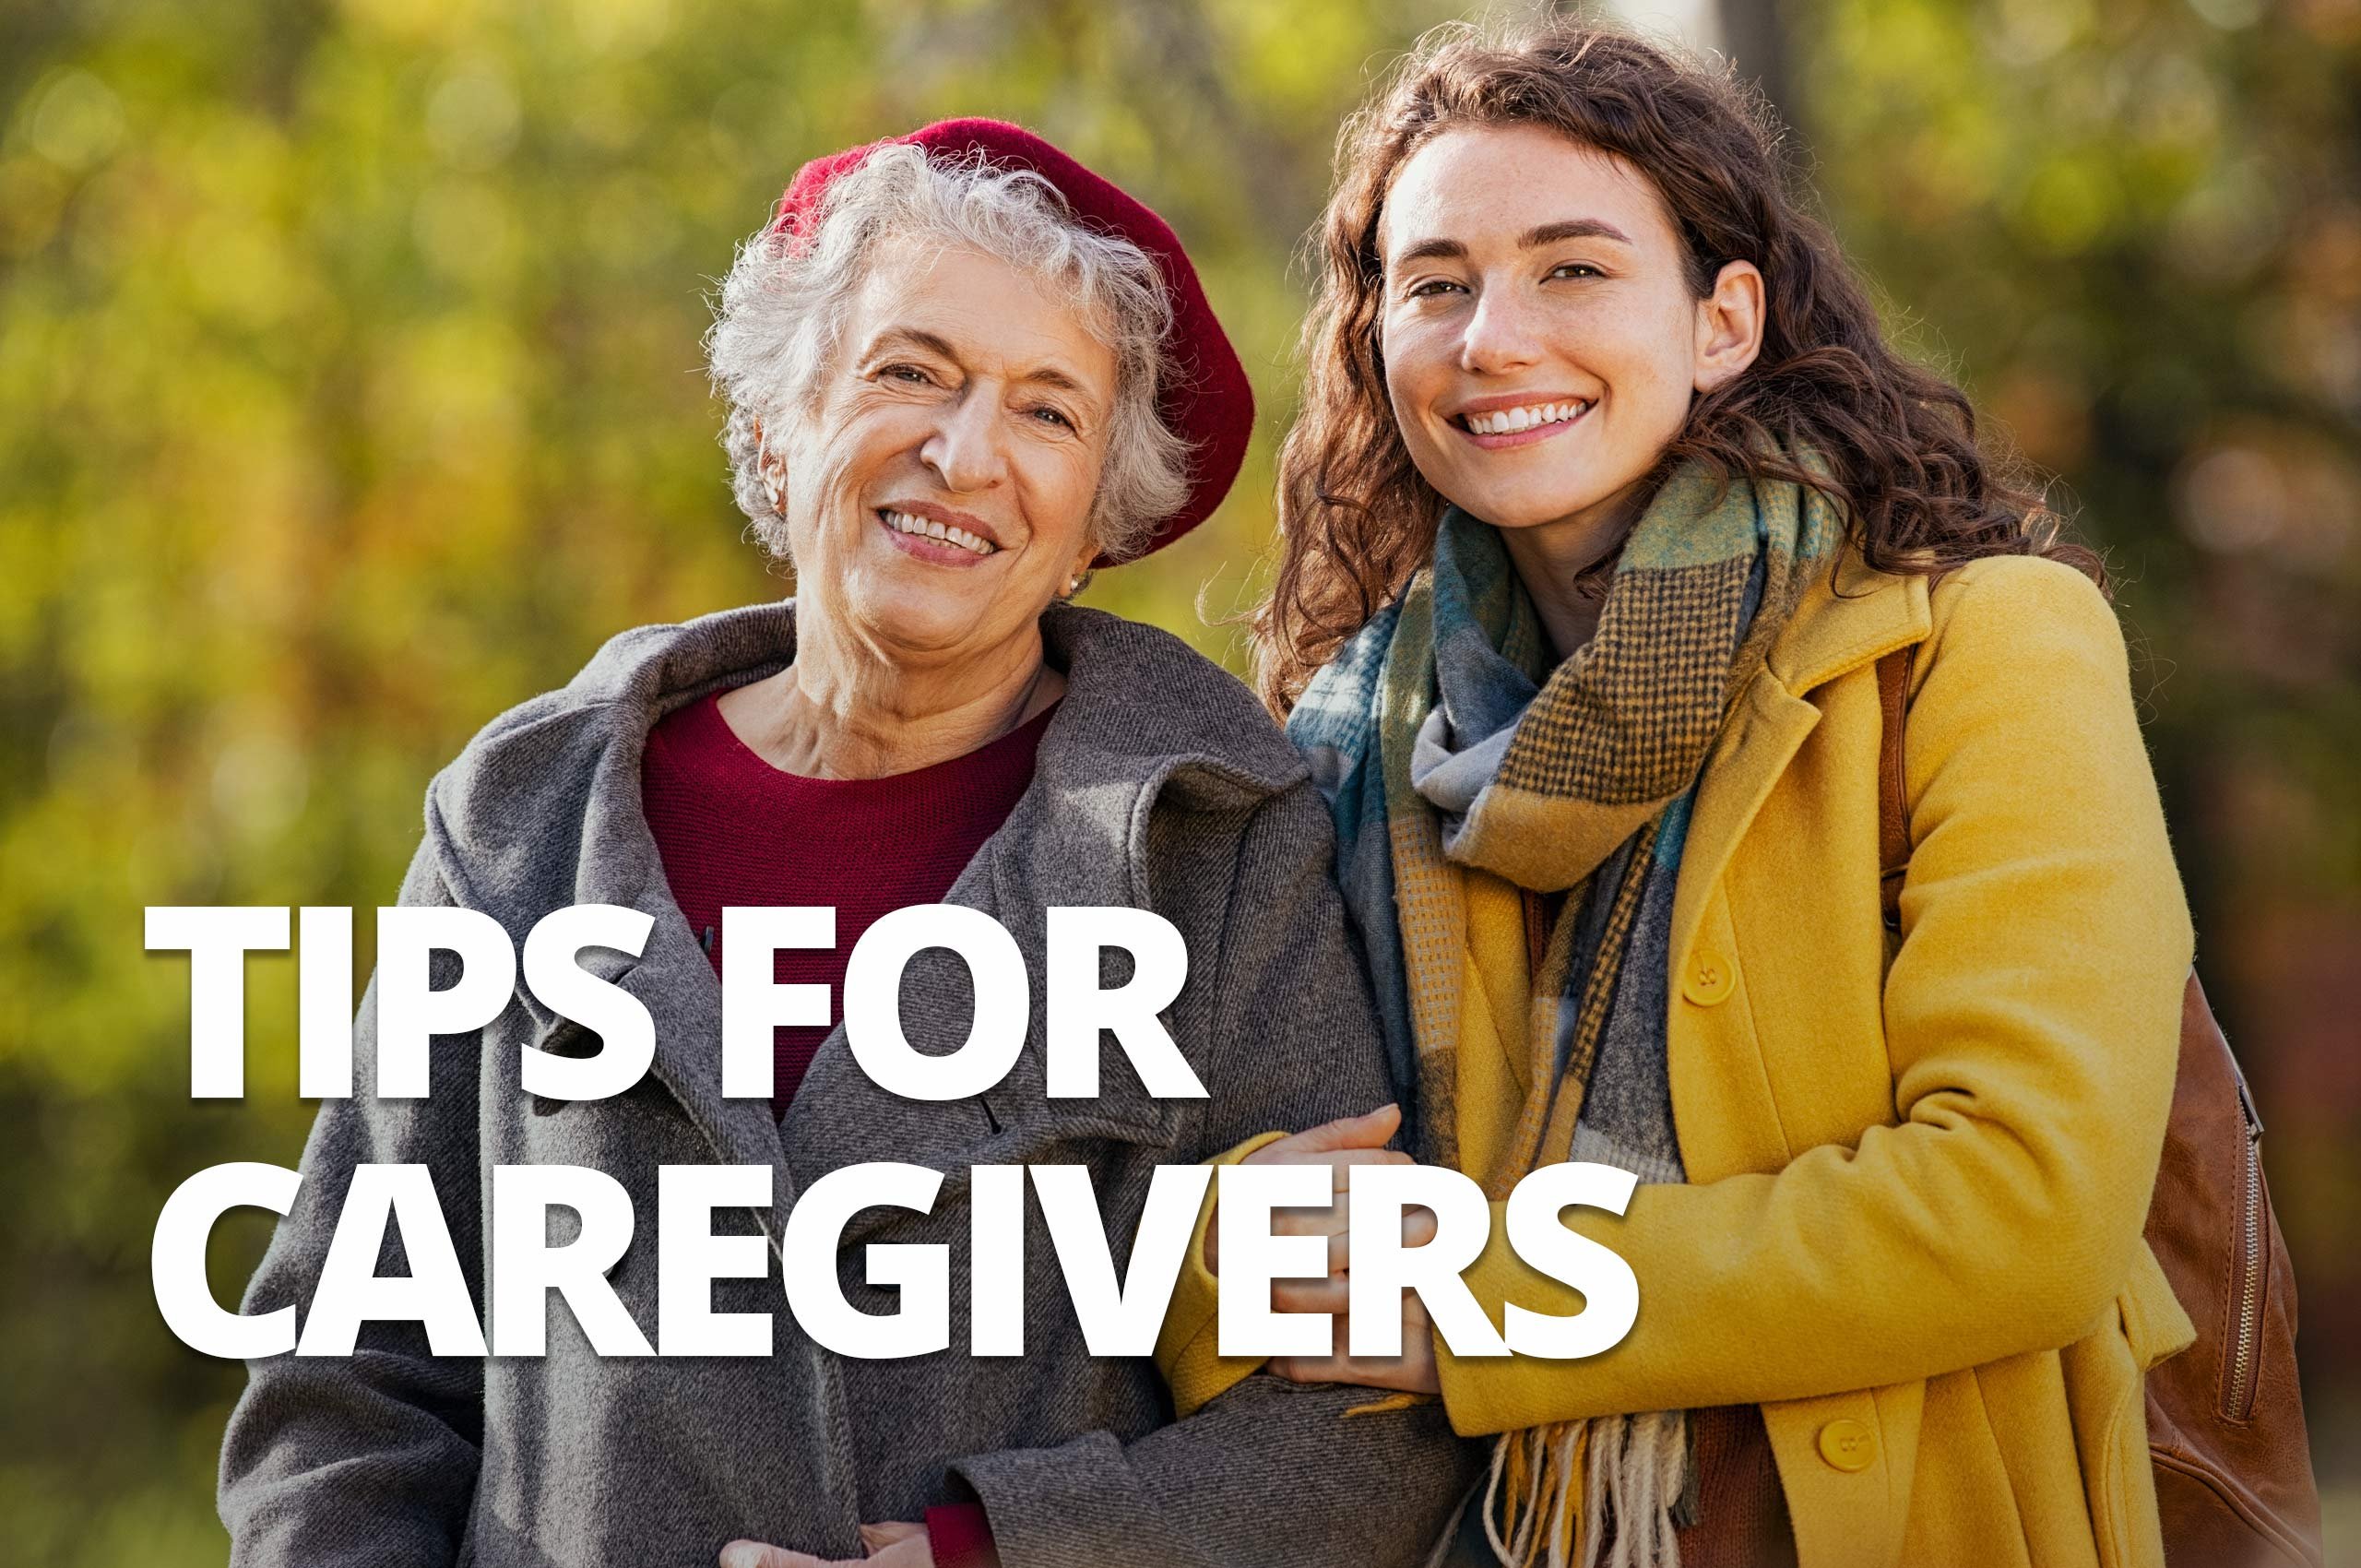 10-Tips-for-Caregivers-2560x1700